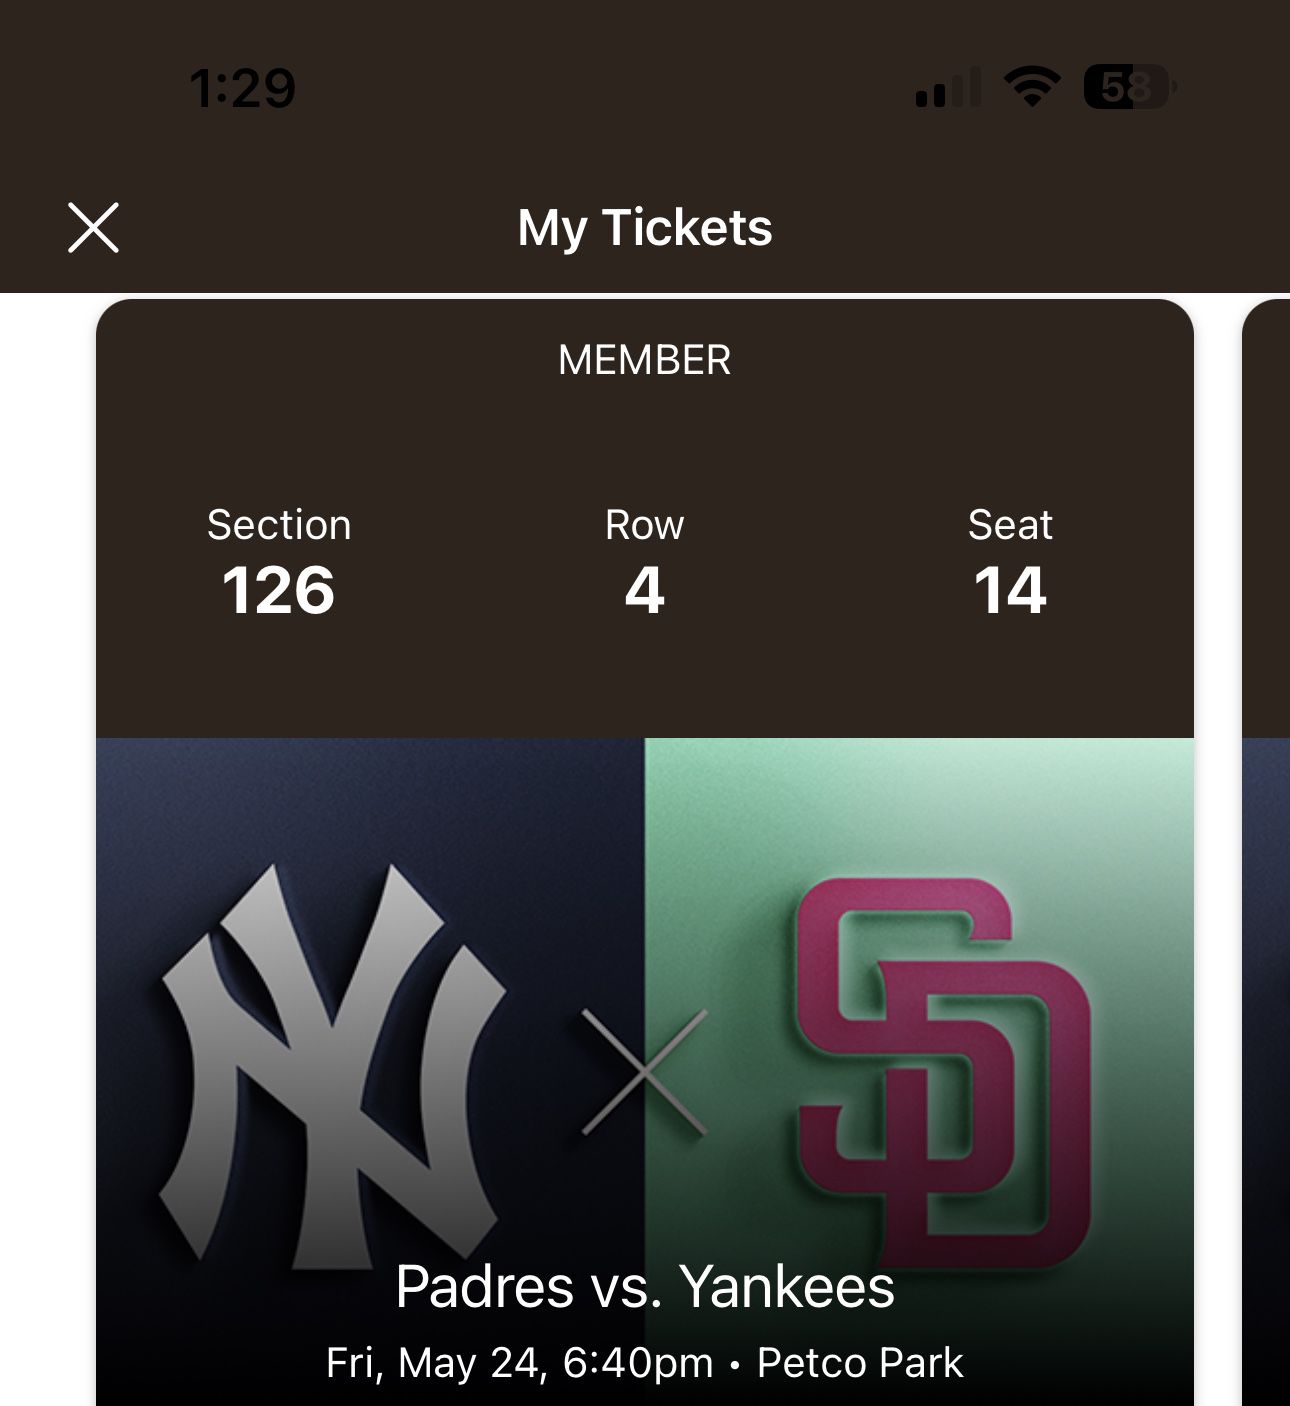 Friday Padres Vs Yankees game. Section 126, Row 4 Two Seats 